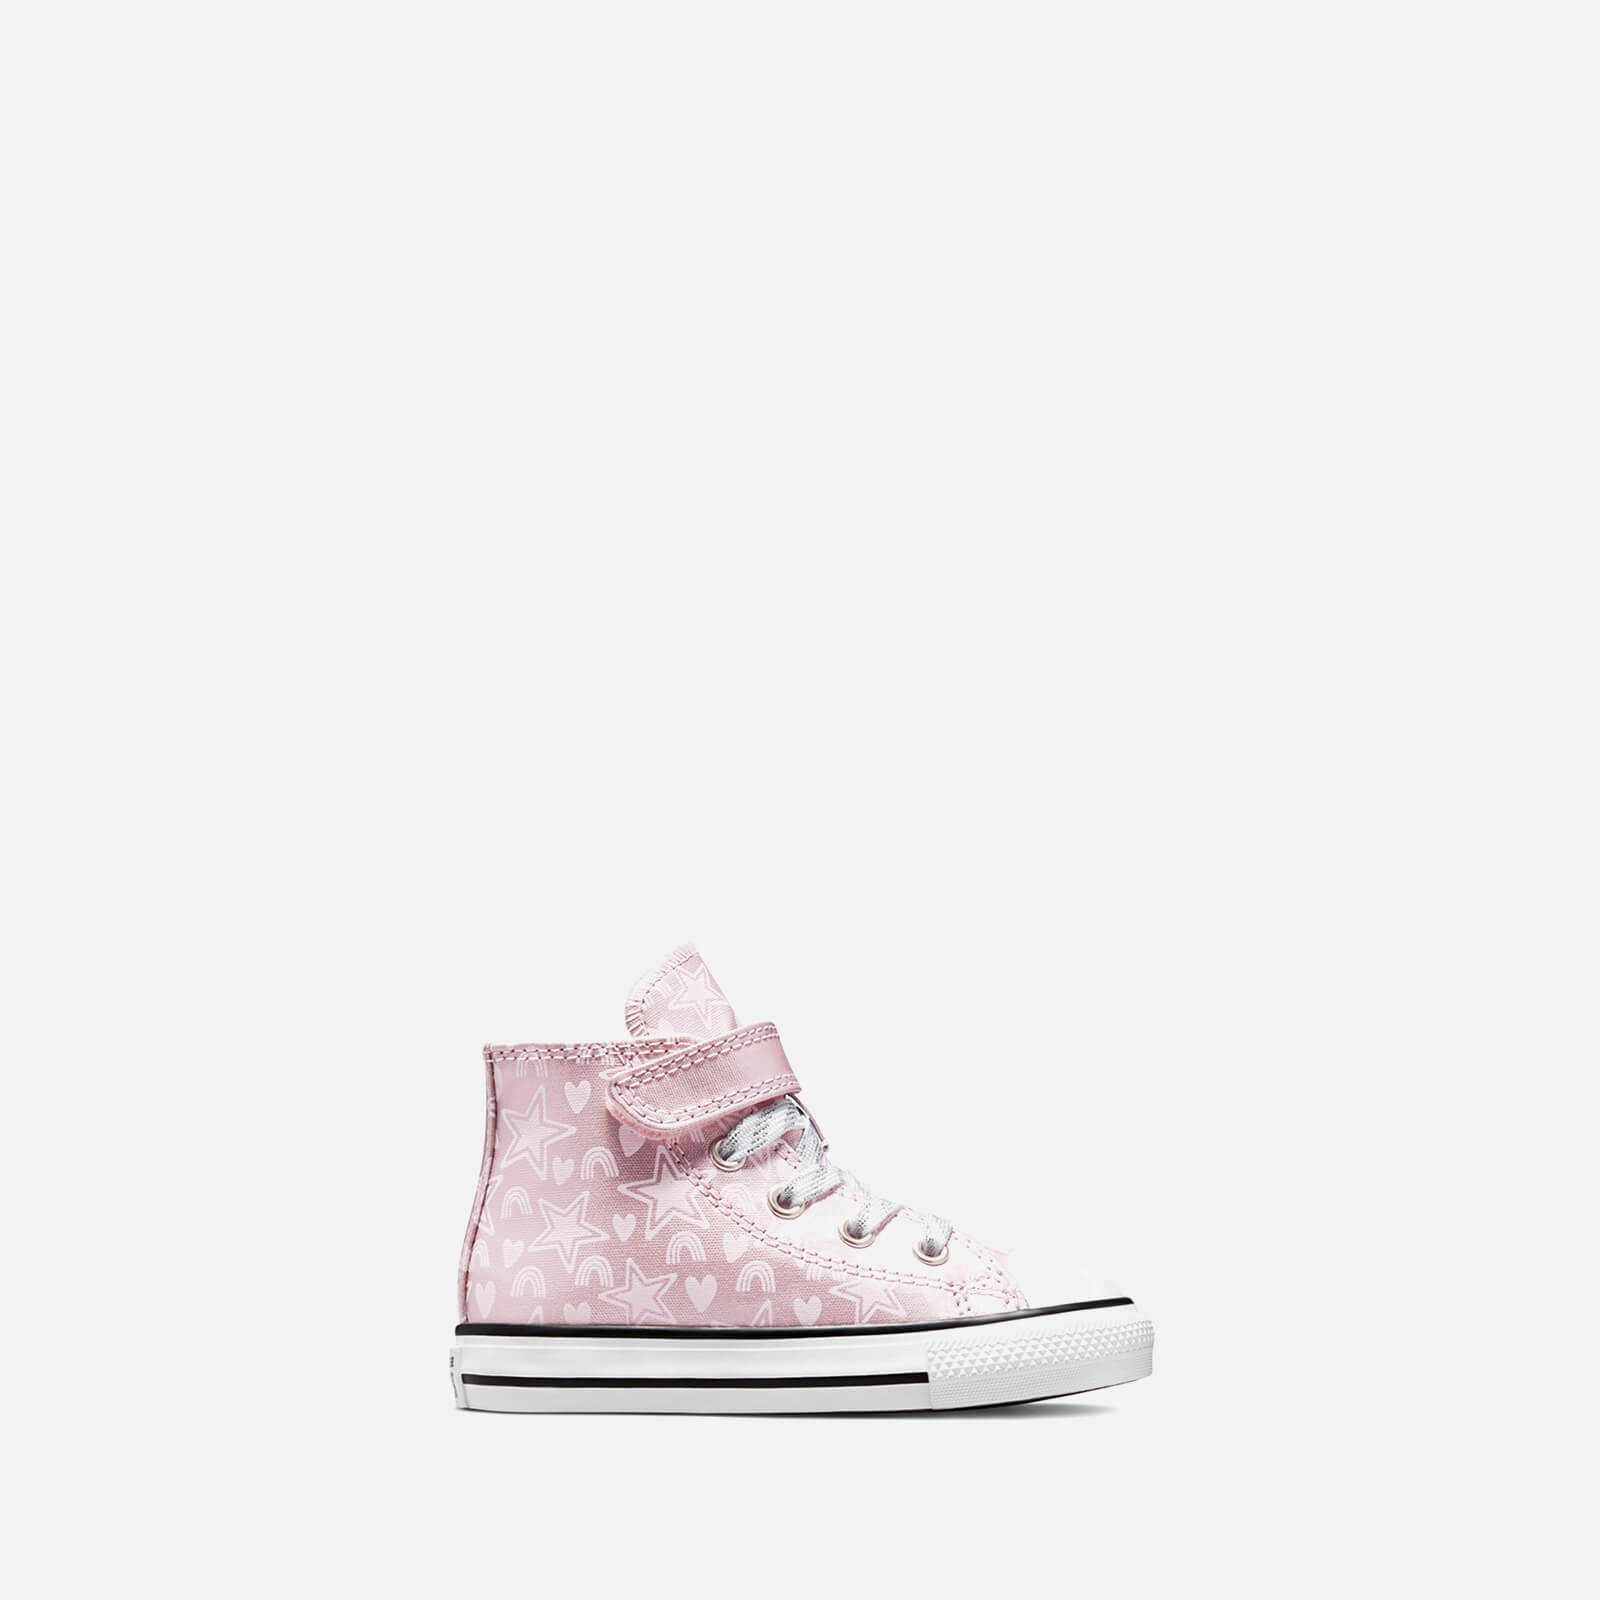 Converse Toddlers' Chuck Taylor All Star 1V Trainers - Pink Foam/Egret/White - UK 4 Baby